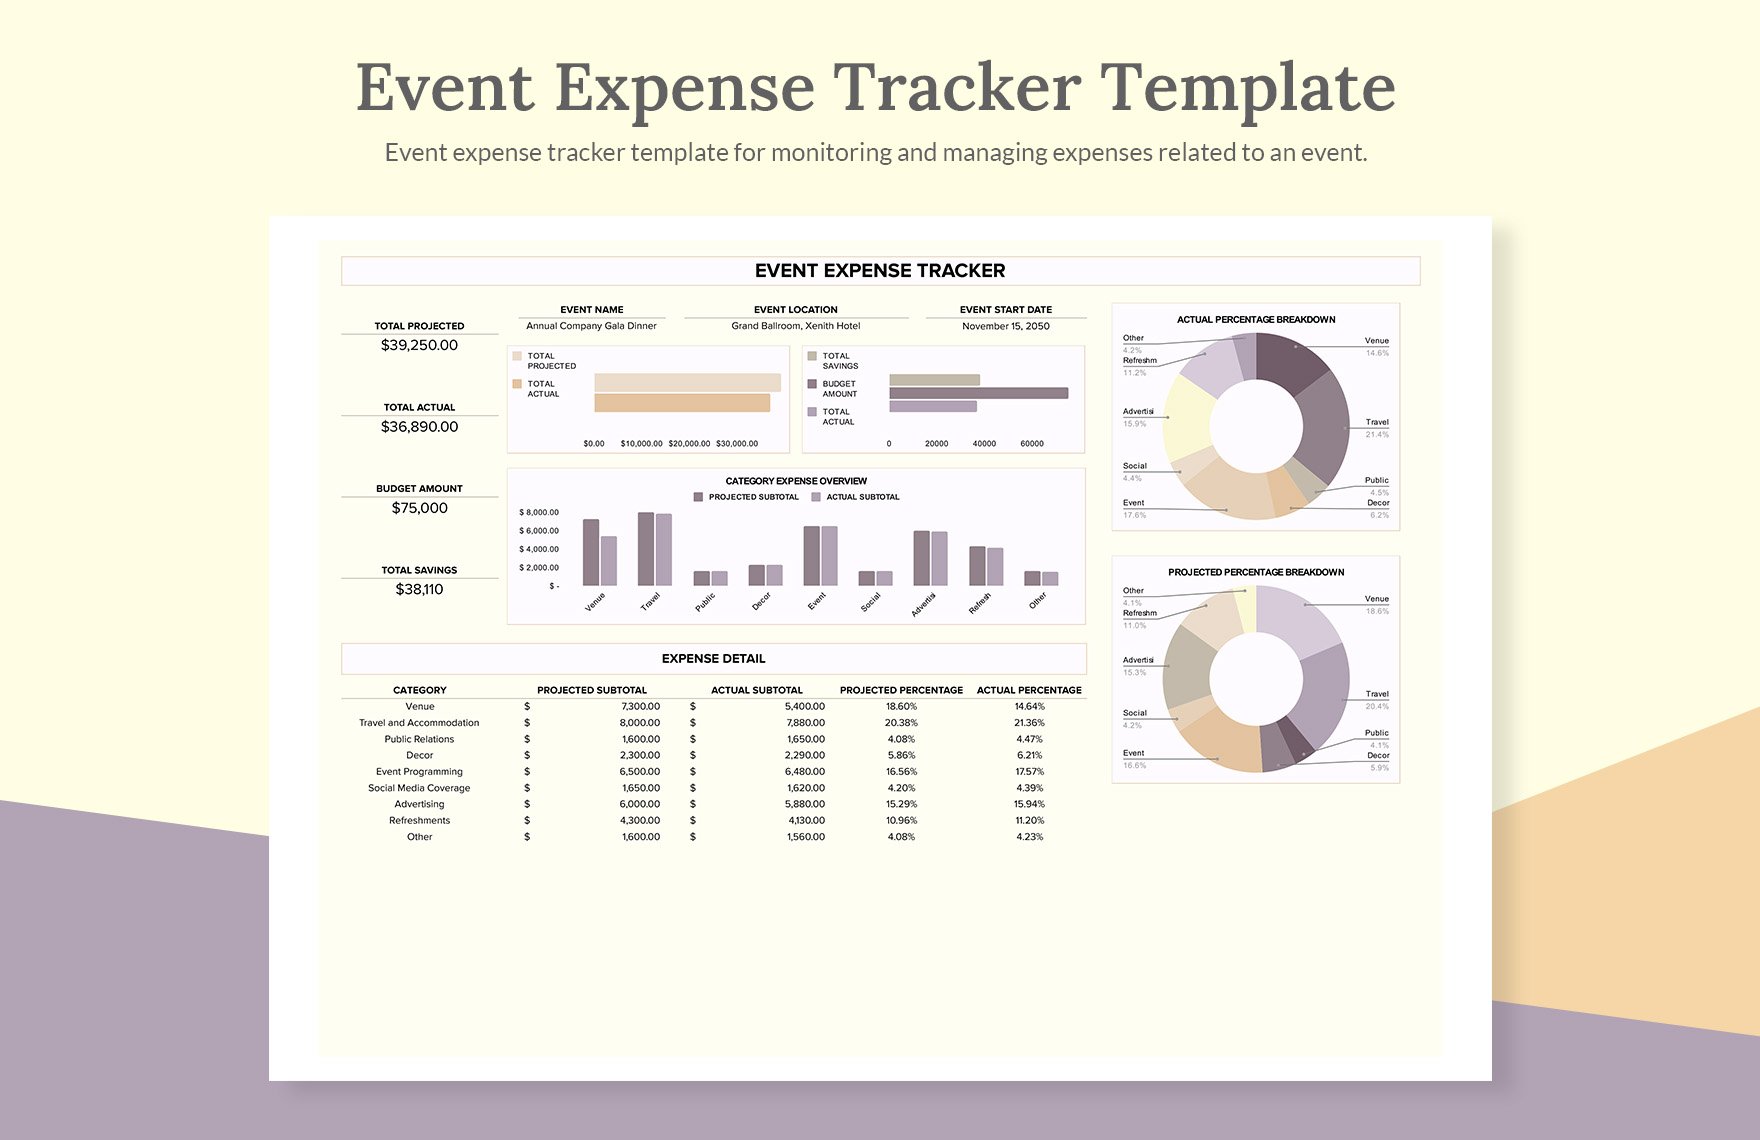 Event Expense Tracker Template